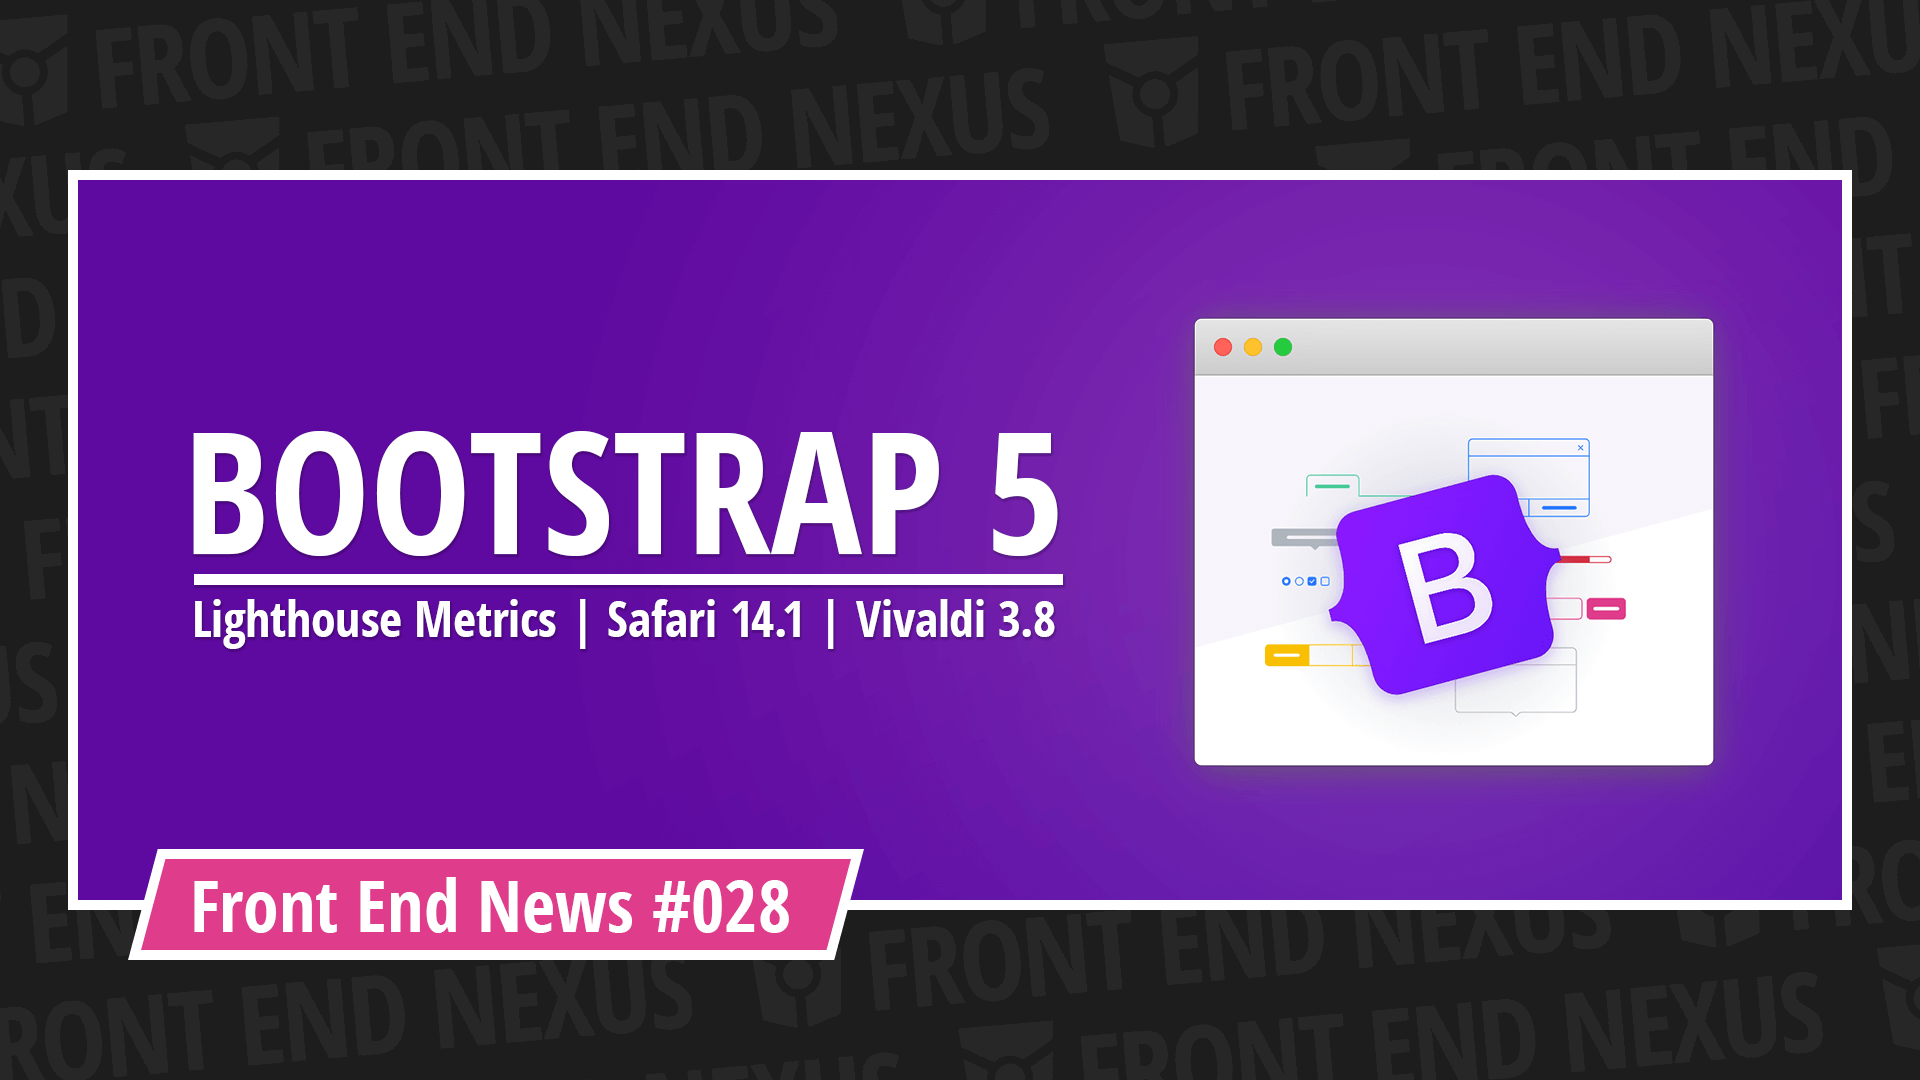 Boostrap 5 is officially out, measure your Web Core Vitals with  Lighthouse Metrics, Safari 14.1, and Vivaldi 3.8 | Front End News #028